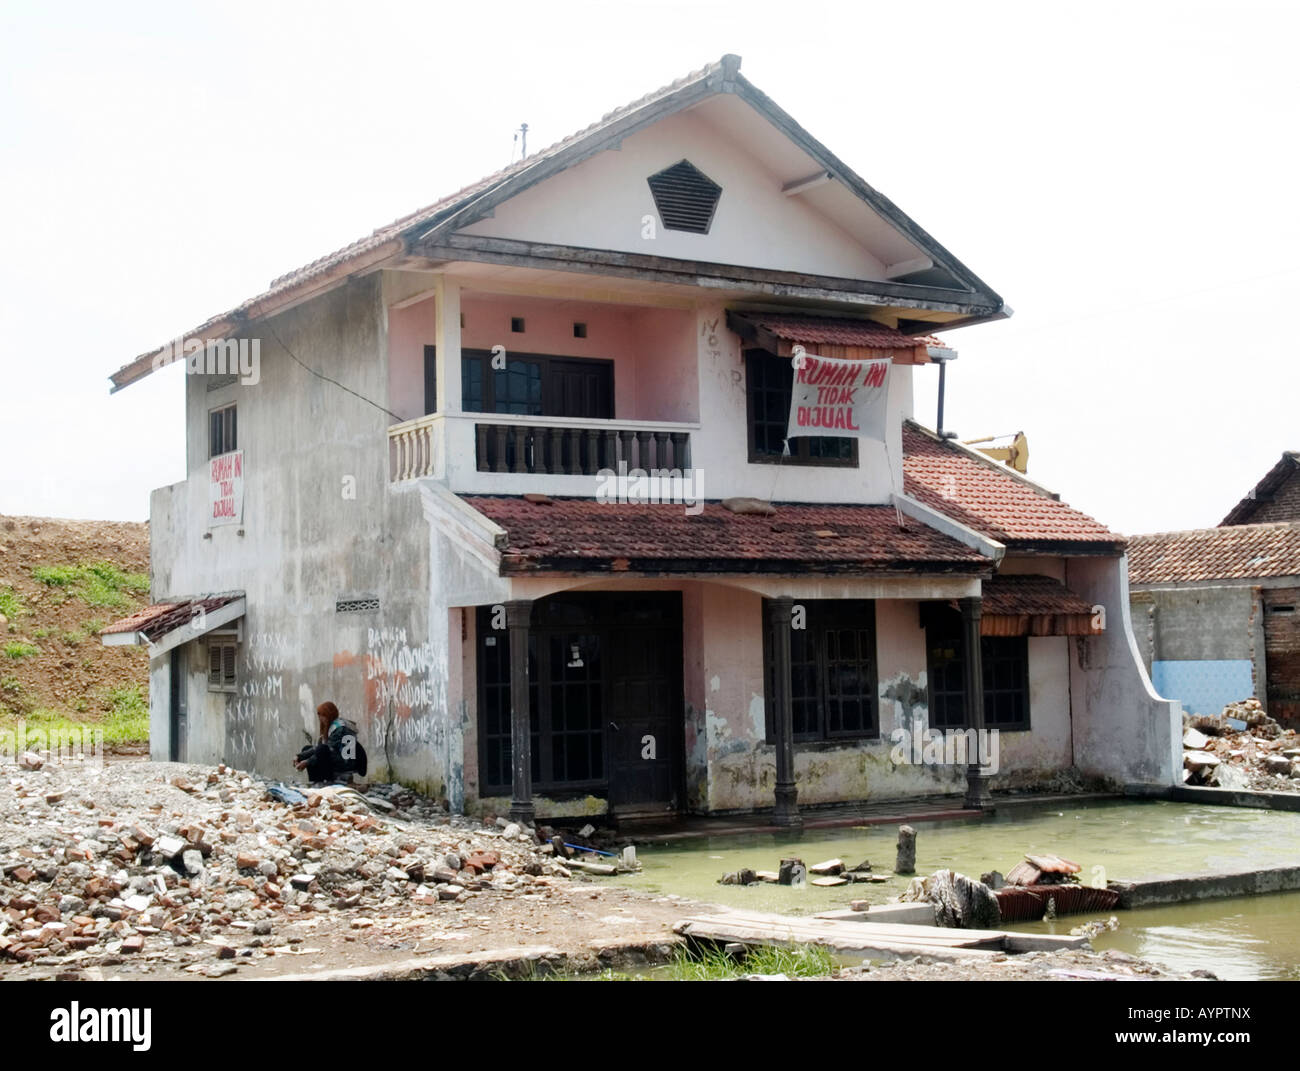 Woman house owner sitting in despair in the shadow of her now worthless house,Sidoarjo,East Java,Indonesia. Stock Photo